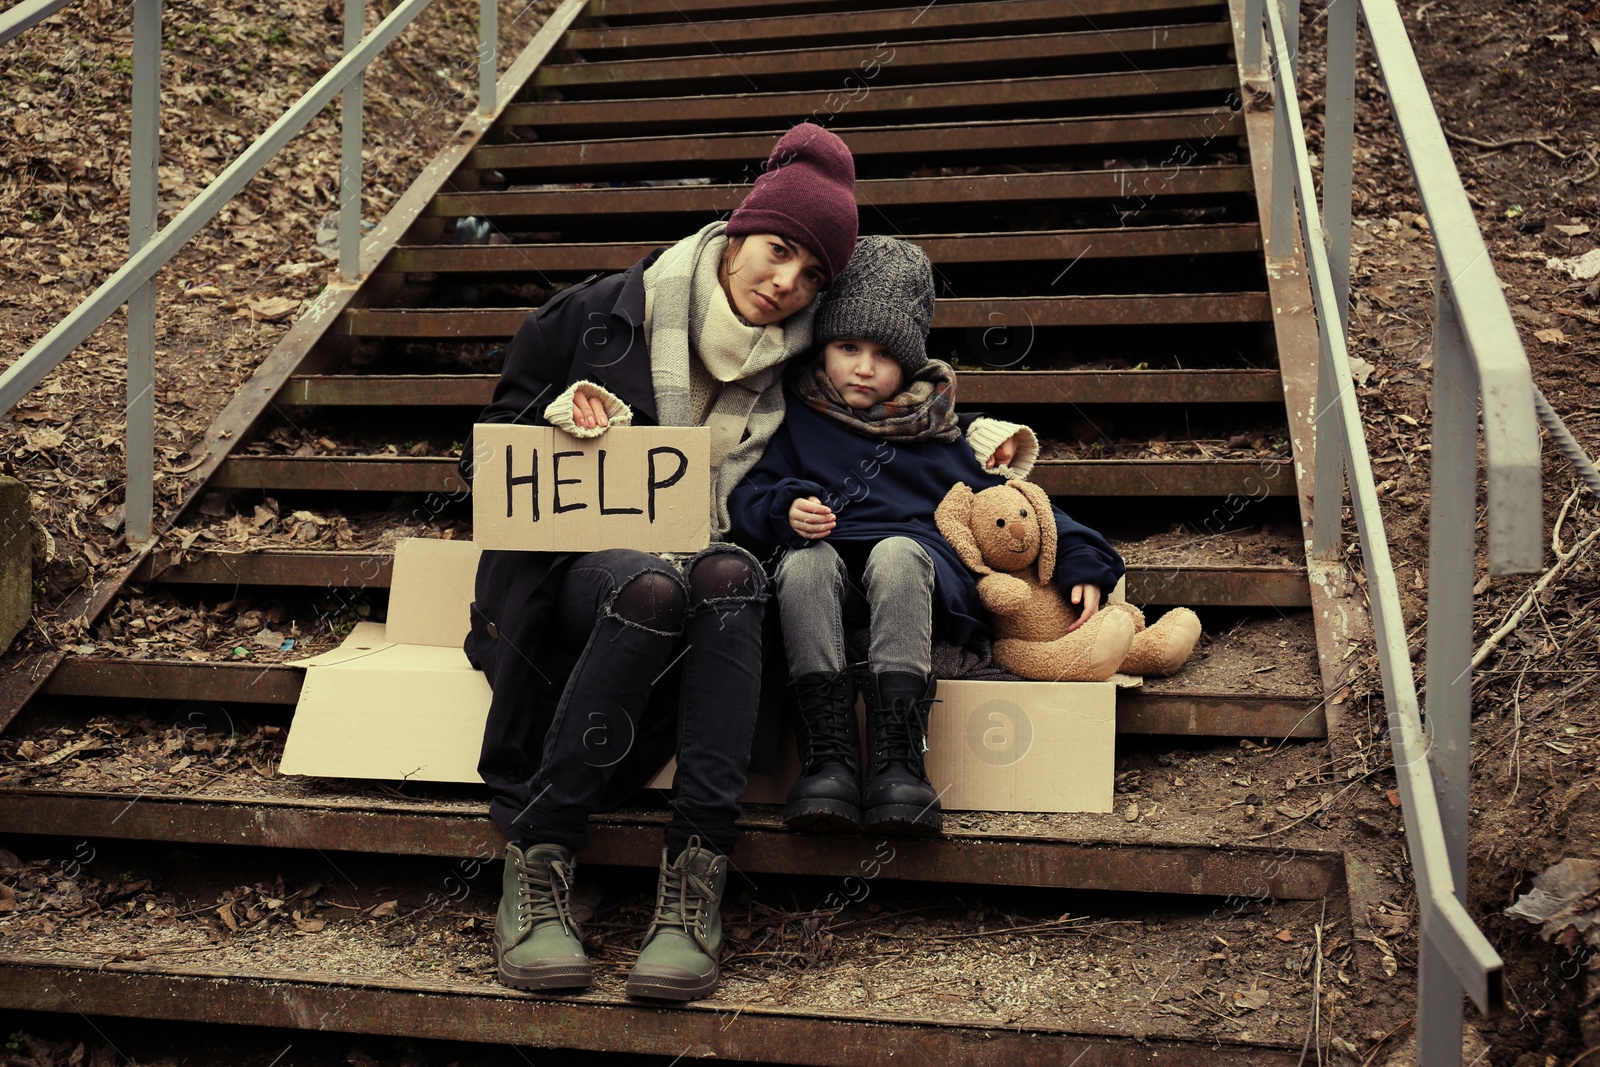 Photo of Poor mother and daughter with HELP sign sitting on stairs outdoors